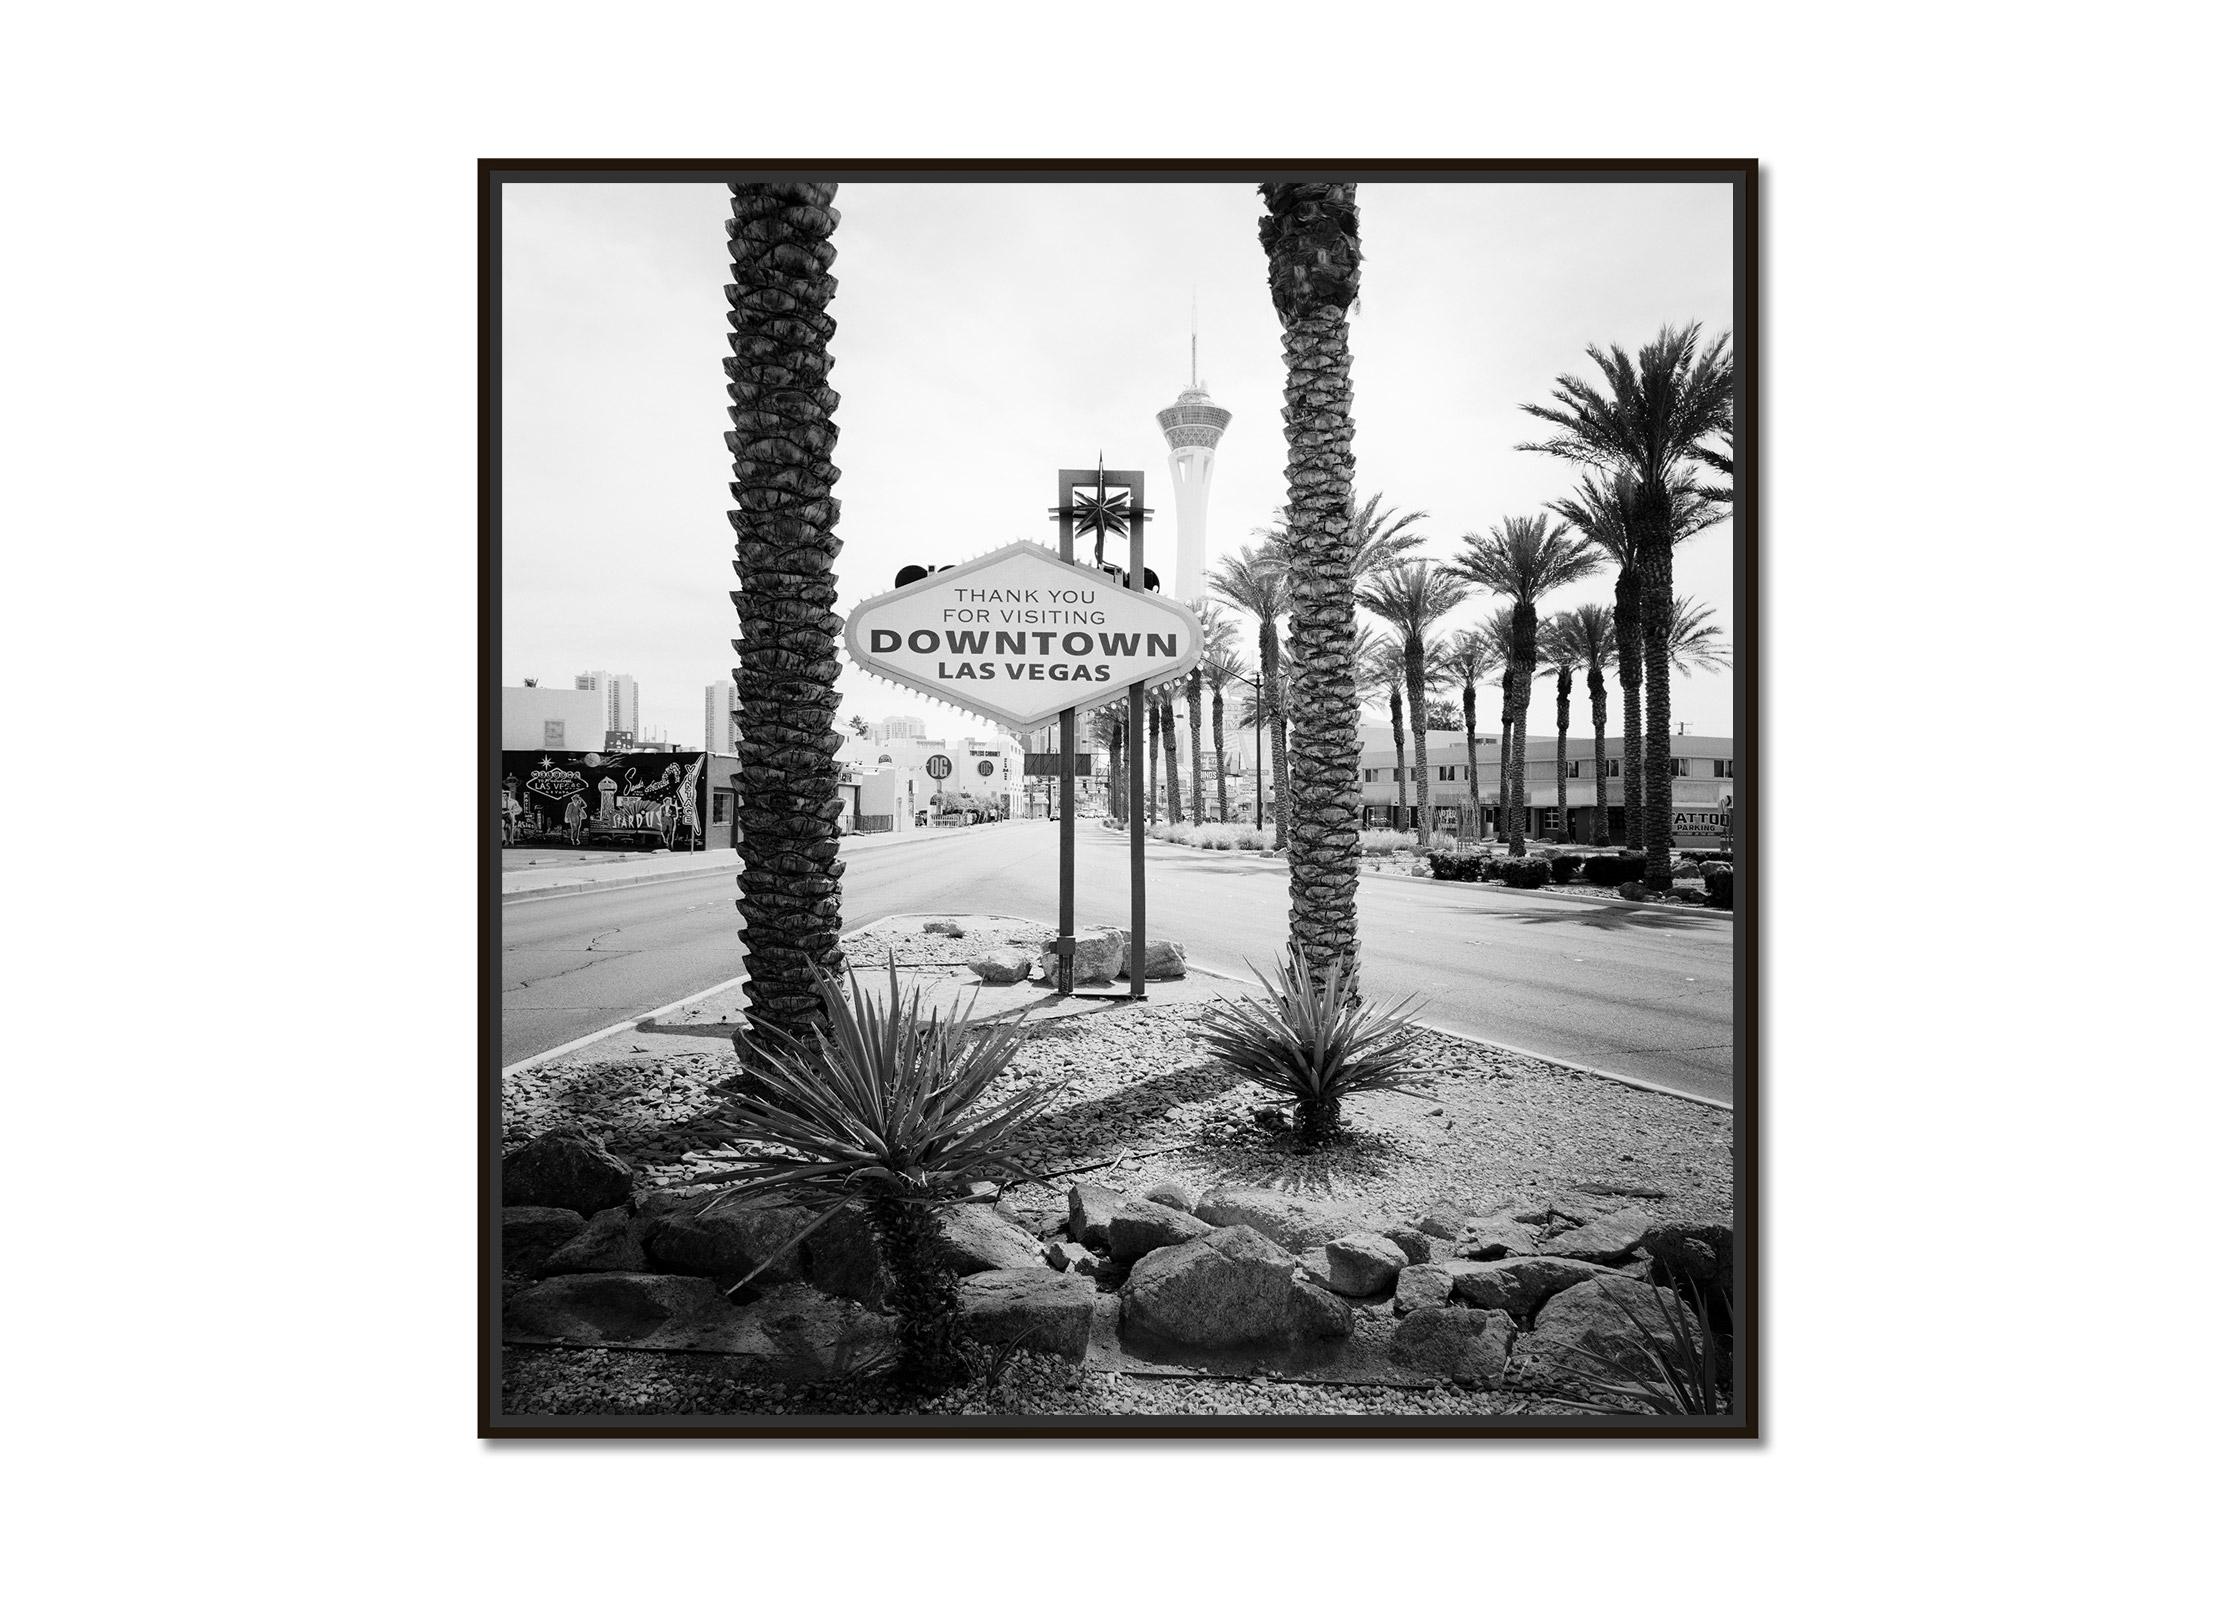 Downtown Las Vegas, Nevada, USA - black & white contemporary landscape art print - Photograph by Gerald Berghammer, Ina Forstinger